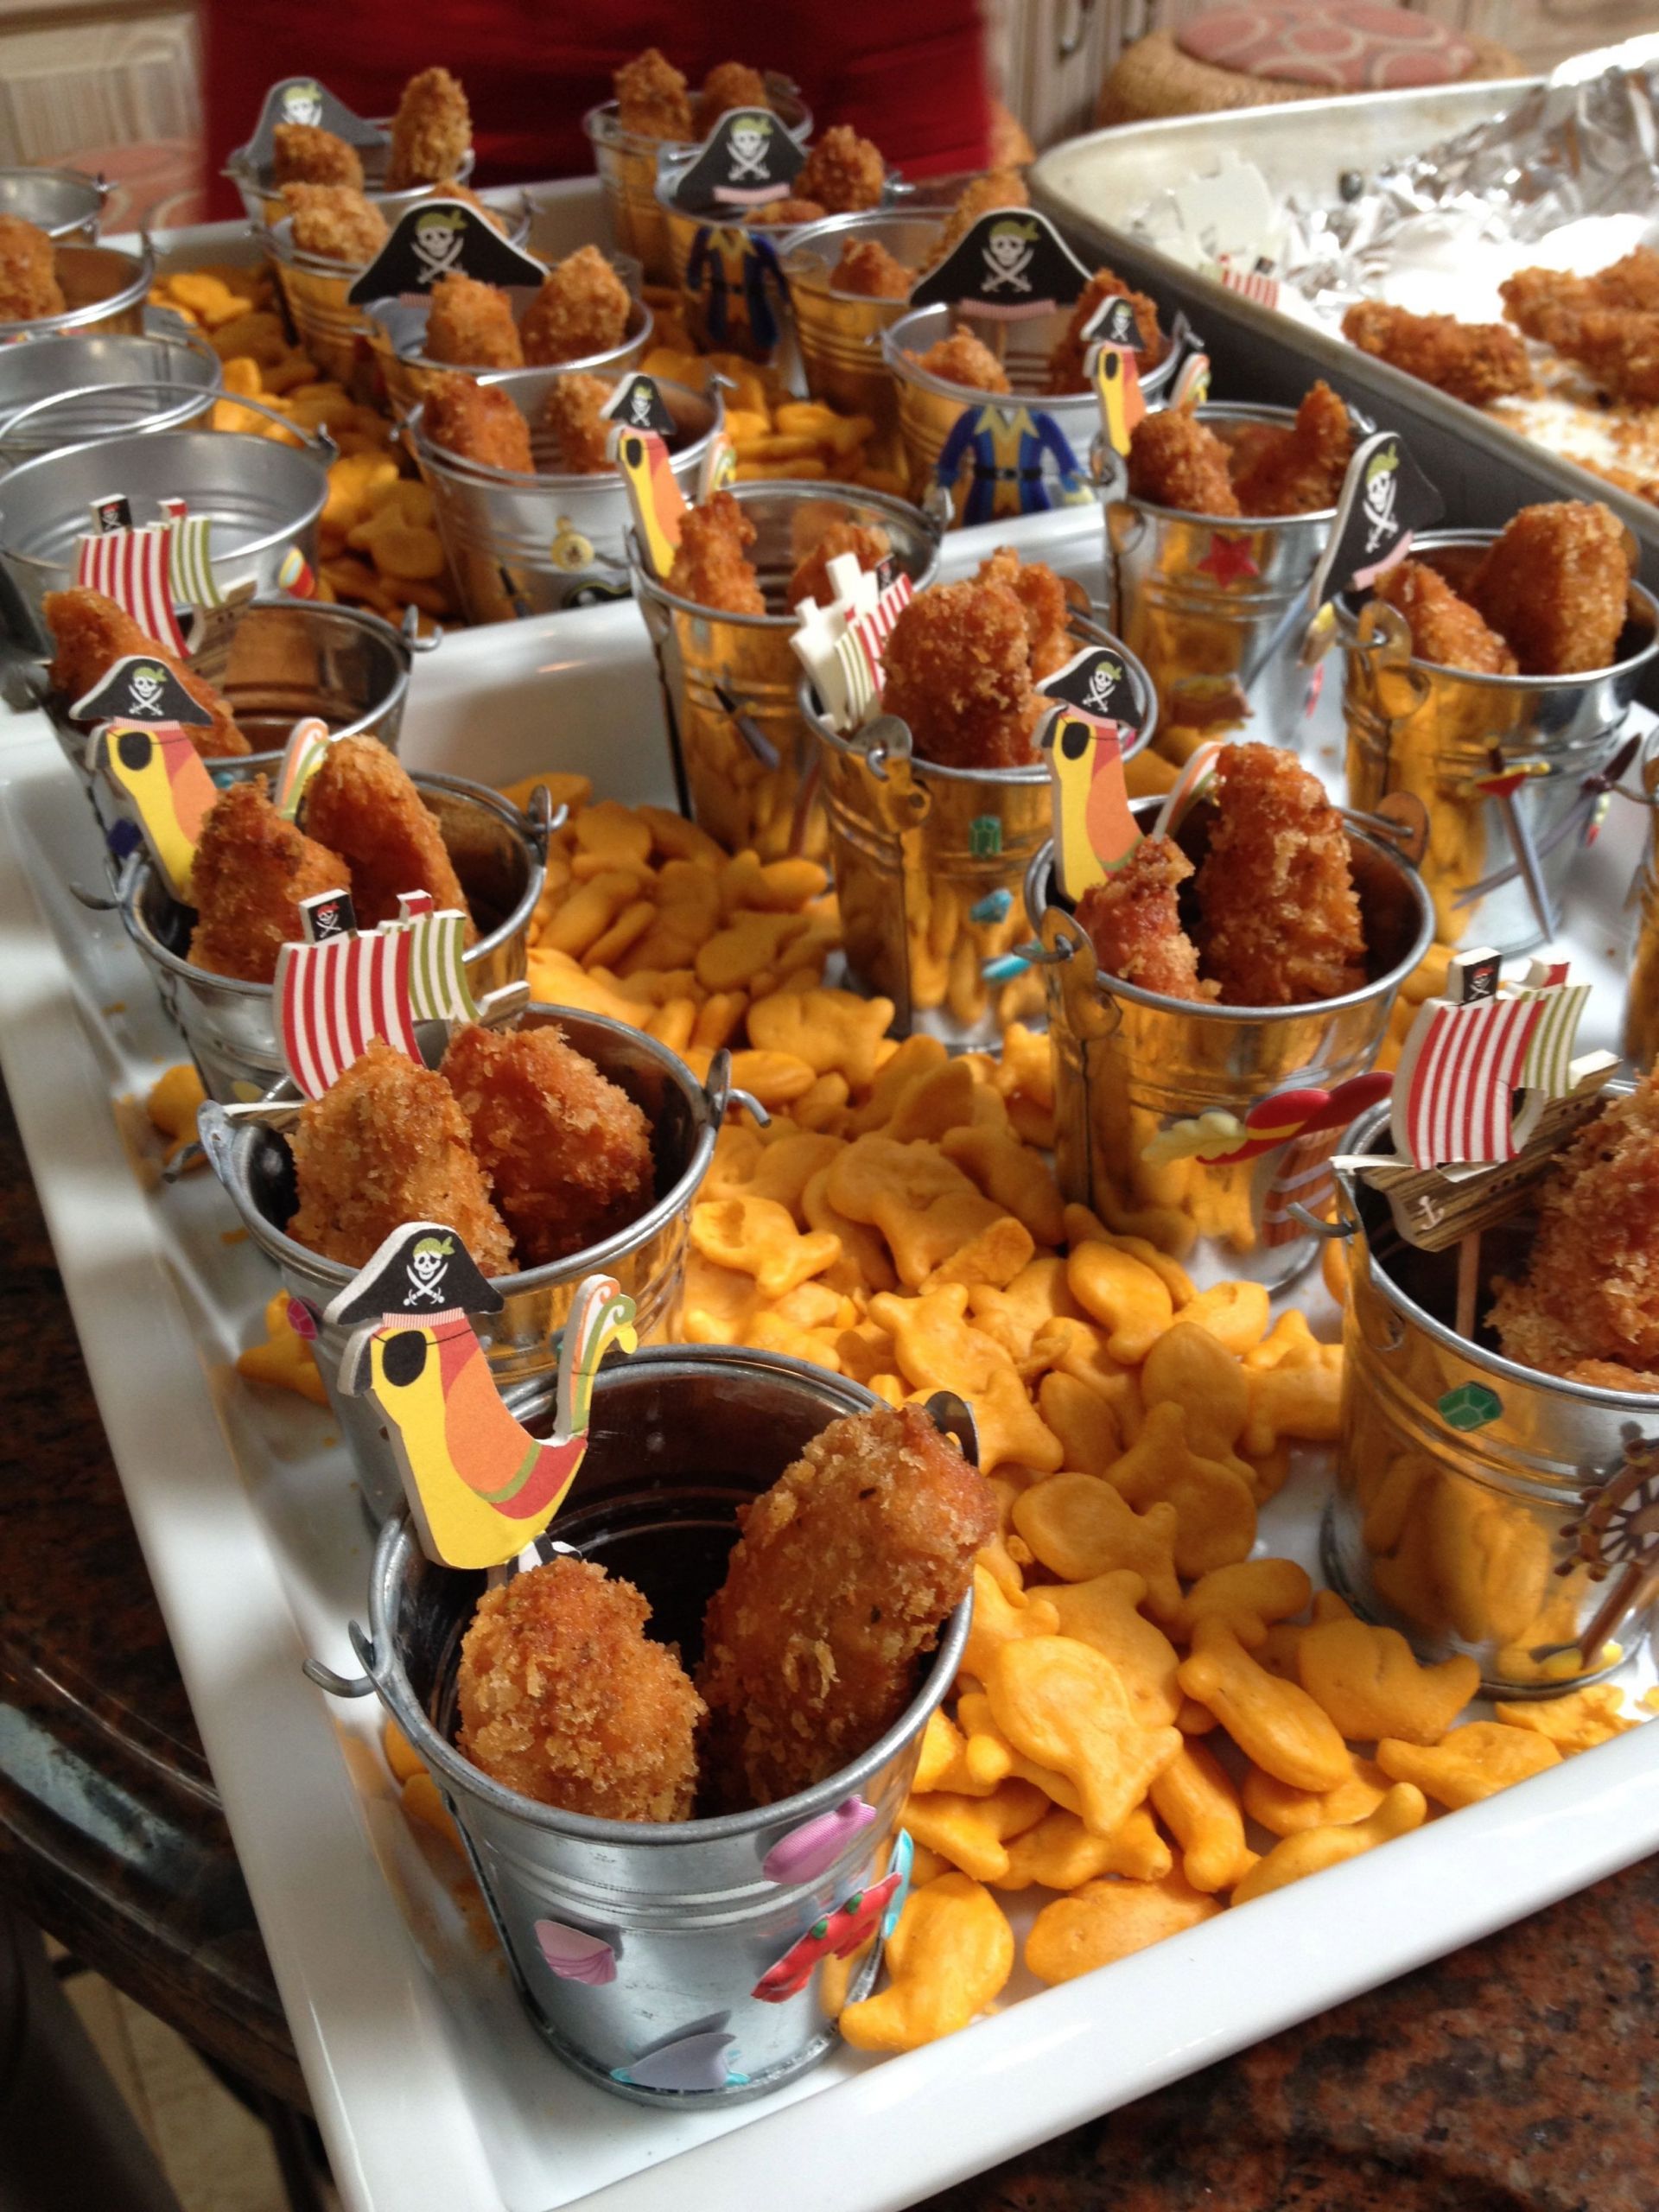 Pirate Party Finger Food Ideas
 Pirate party food…icken nug s in little pails on a